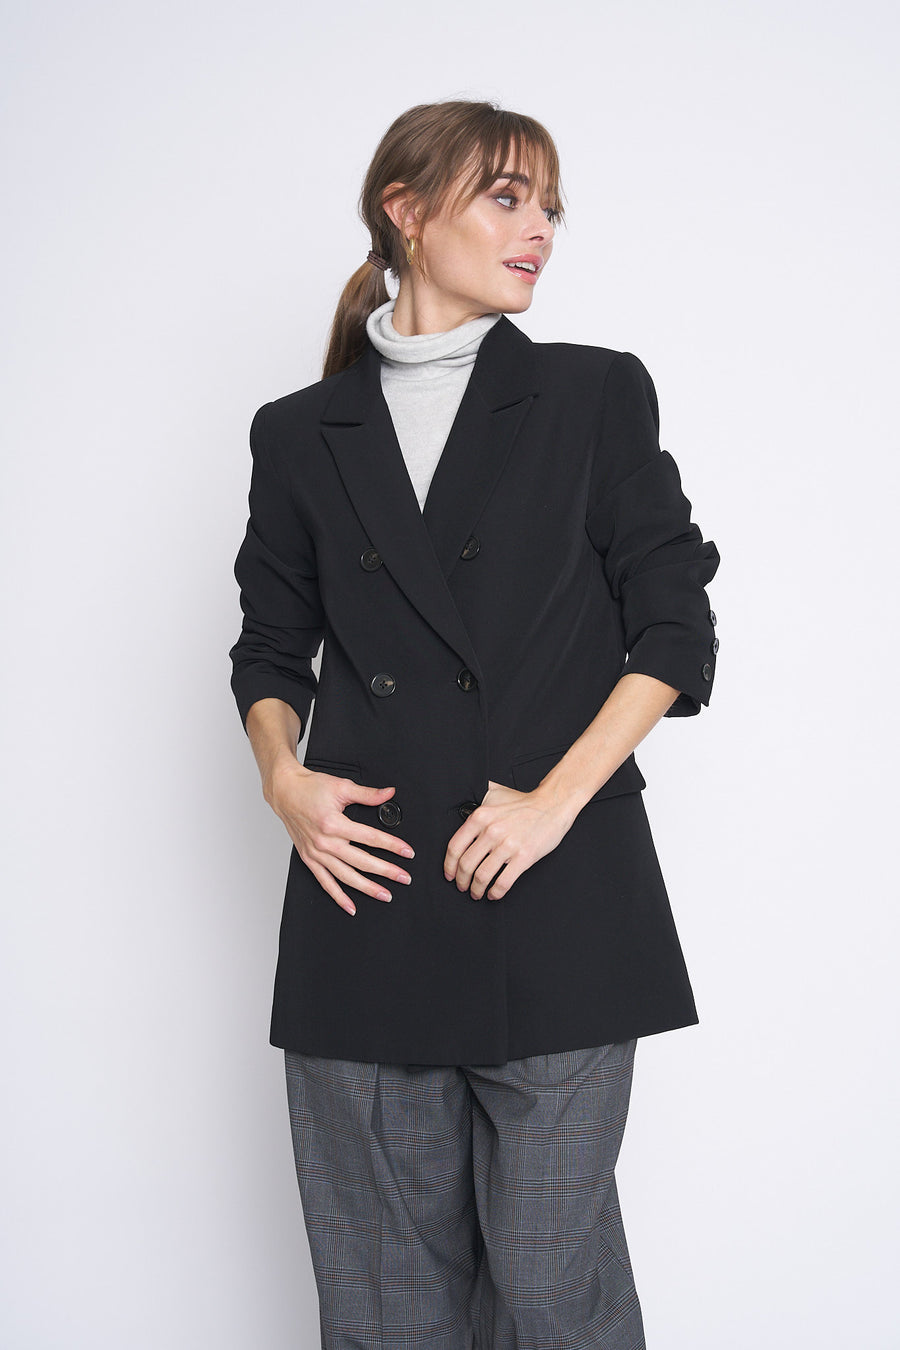 No Srcipt image - Images of 10 of 10 Double Breasted Staple Jacket Women's Workwear Office Wear Women's Fashion Sophisticated Style Chic Simple Classic Black Blazer Fall Jacket Fall Fashion Women's Outerwear Timeless Everyday Blazer Neutral Color The Emory Blazer In Black